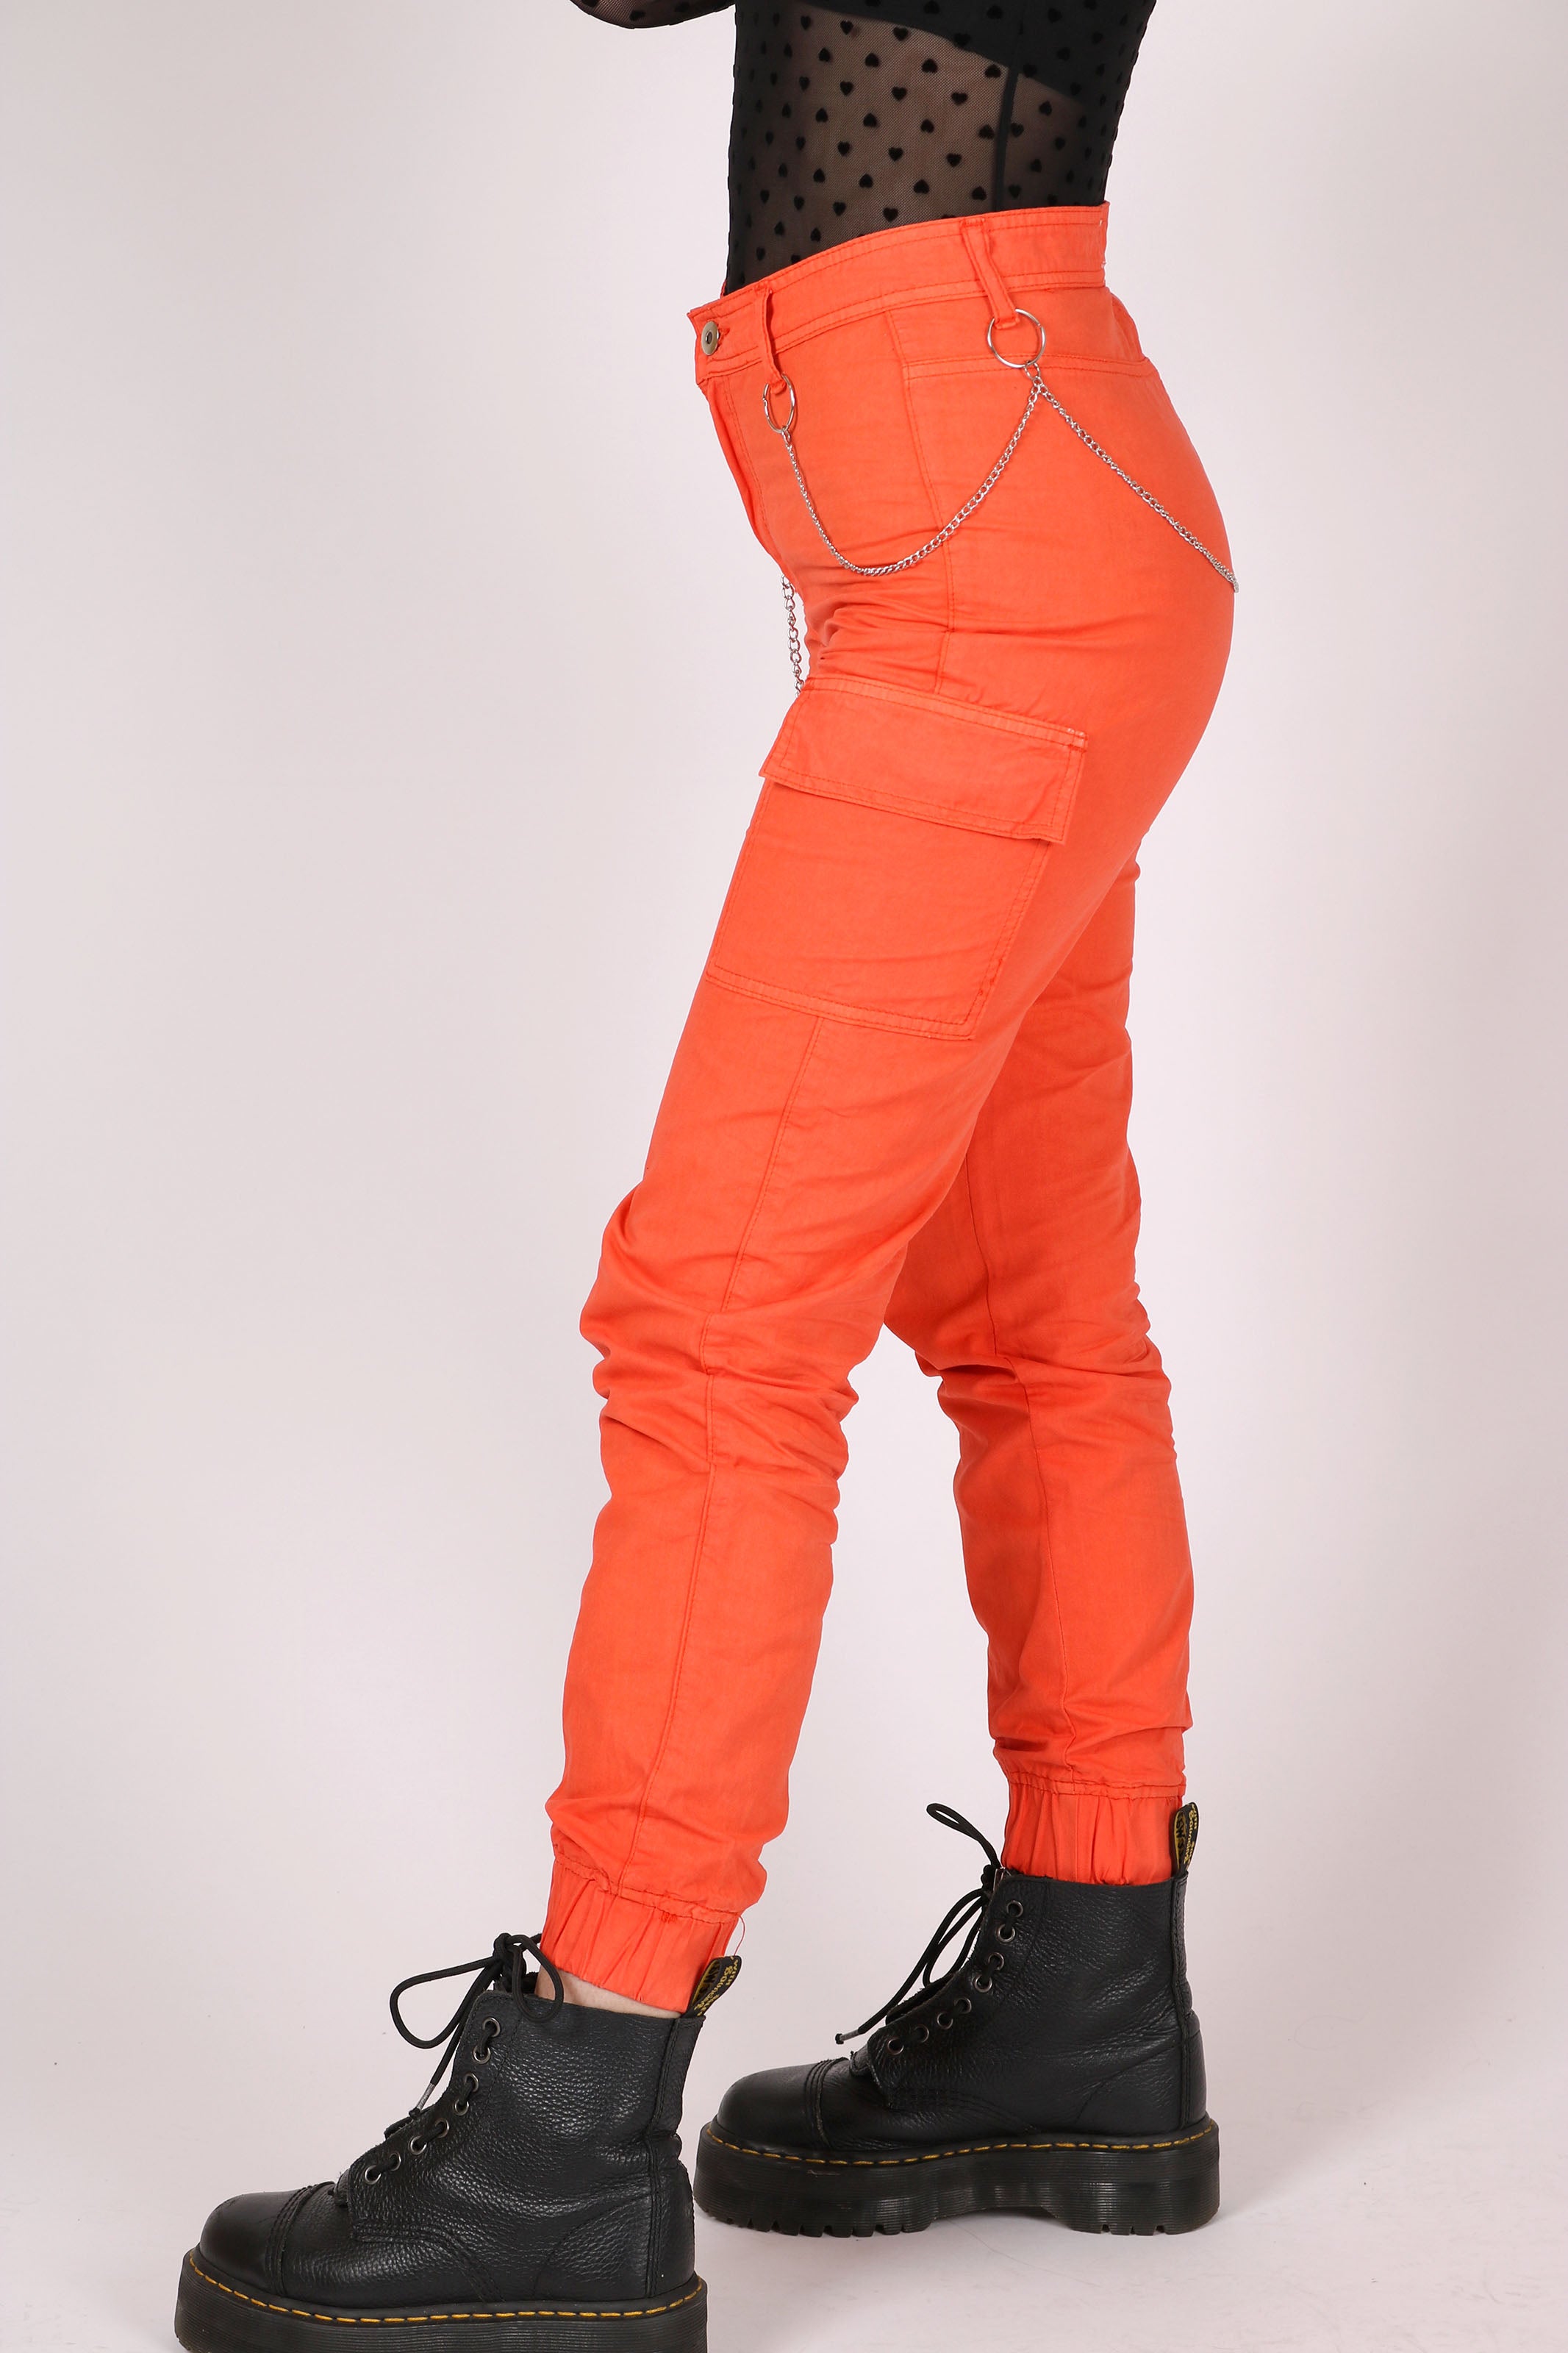 Yeah We Like These Too Orange Cargo Trousers With Chains One Above Another